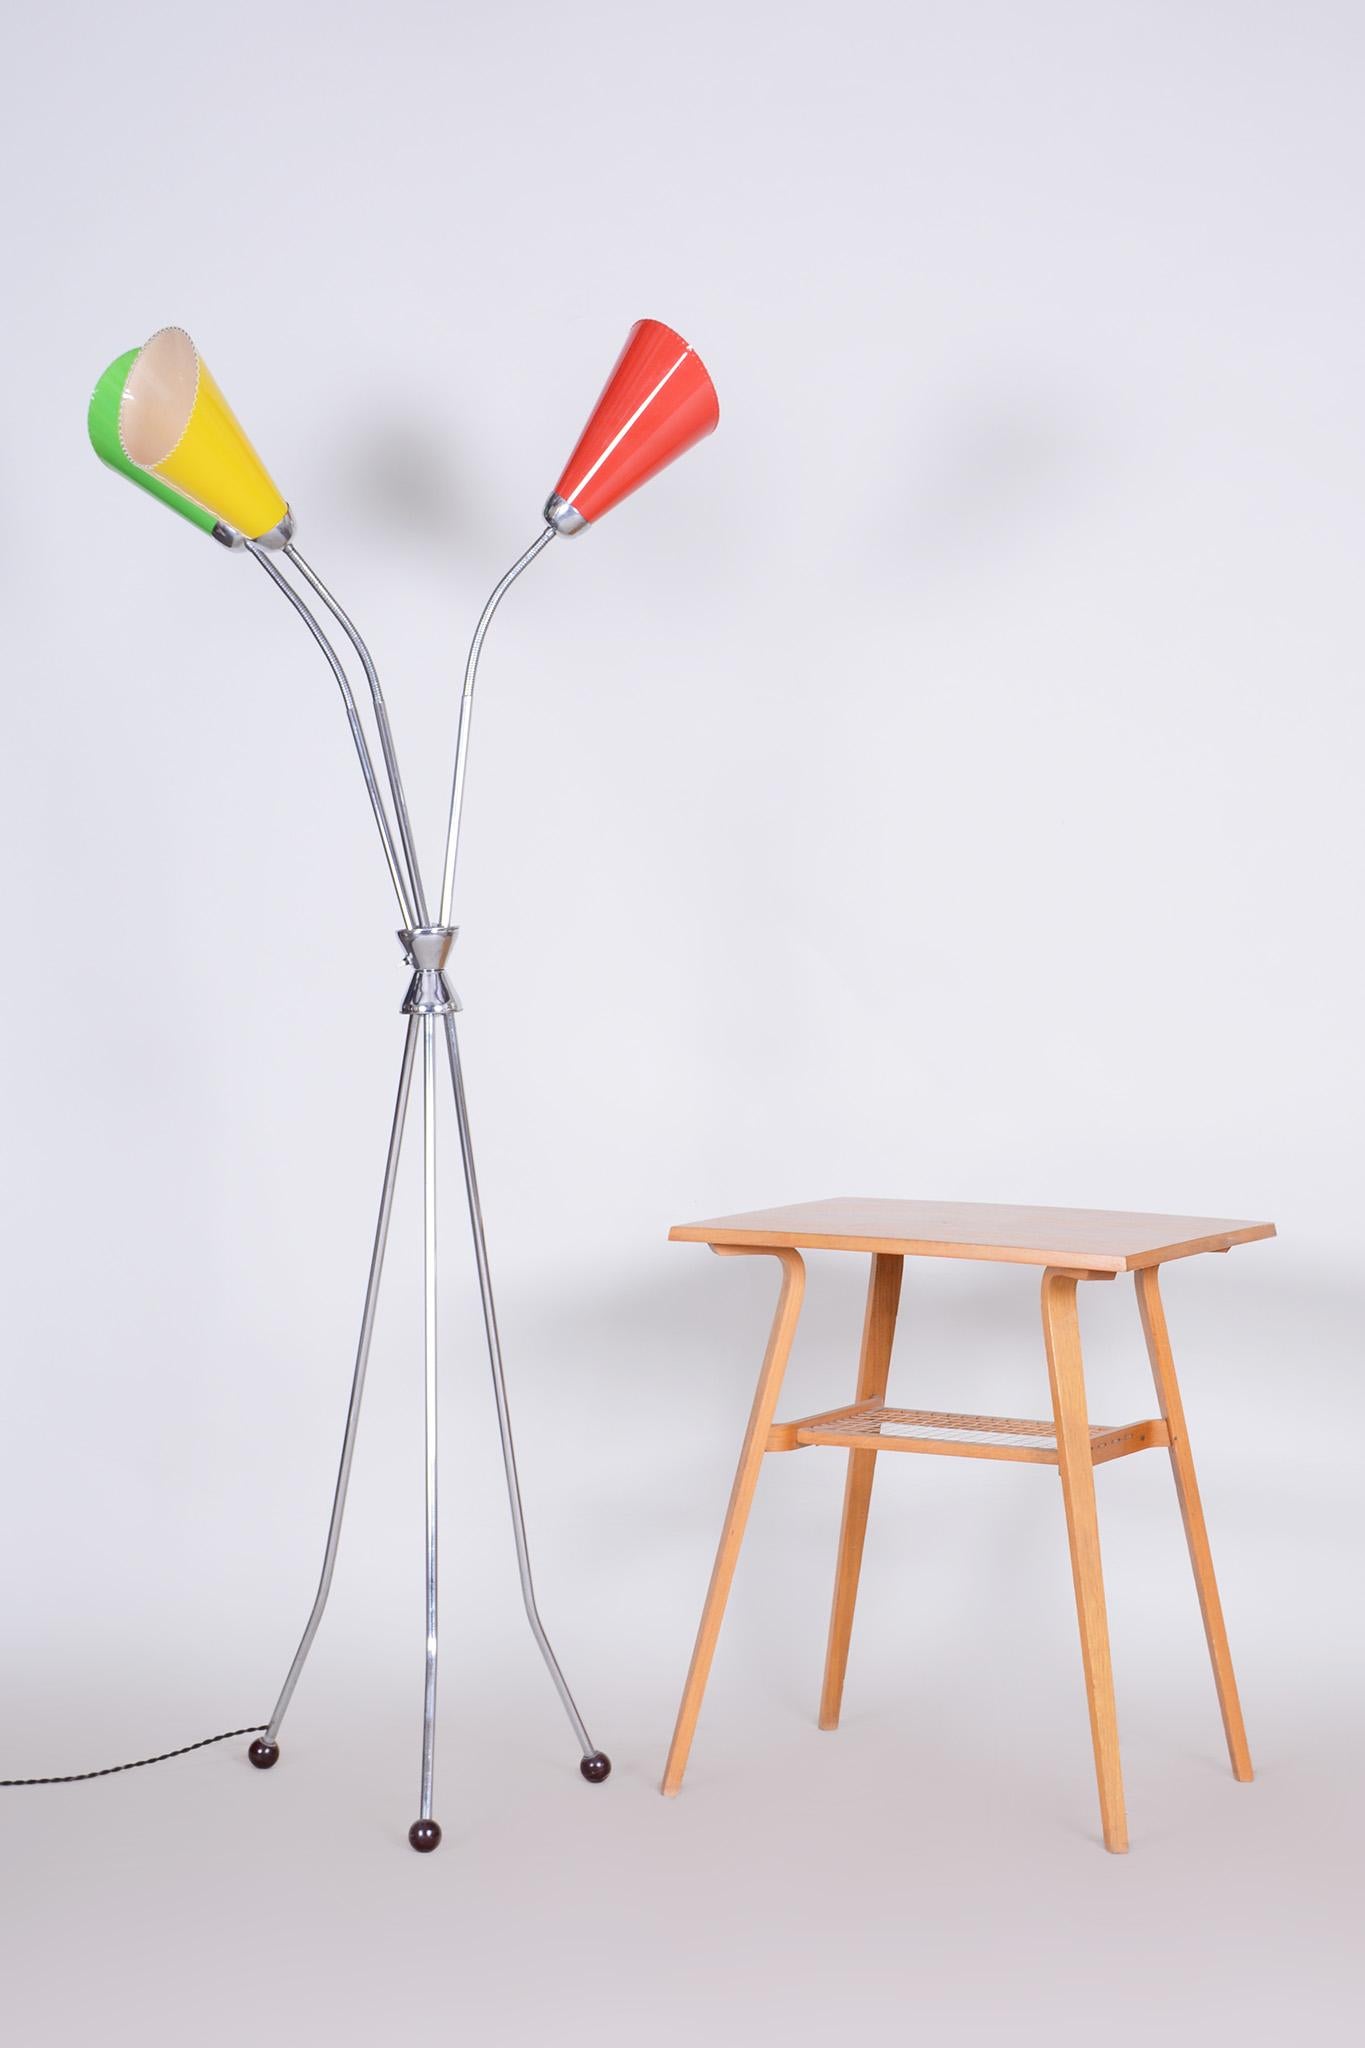 Newly electrified Napako floor lamp made in 1950s Czechia. It's been fully restored and is made out of chrome plated steel.